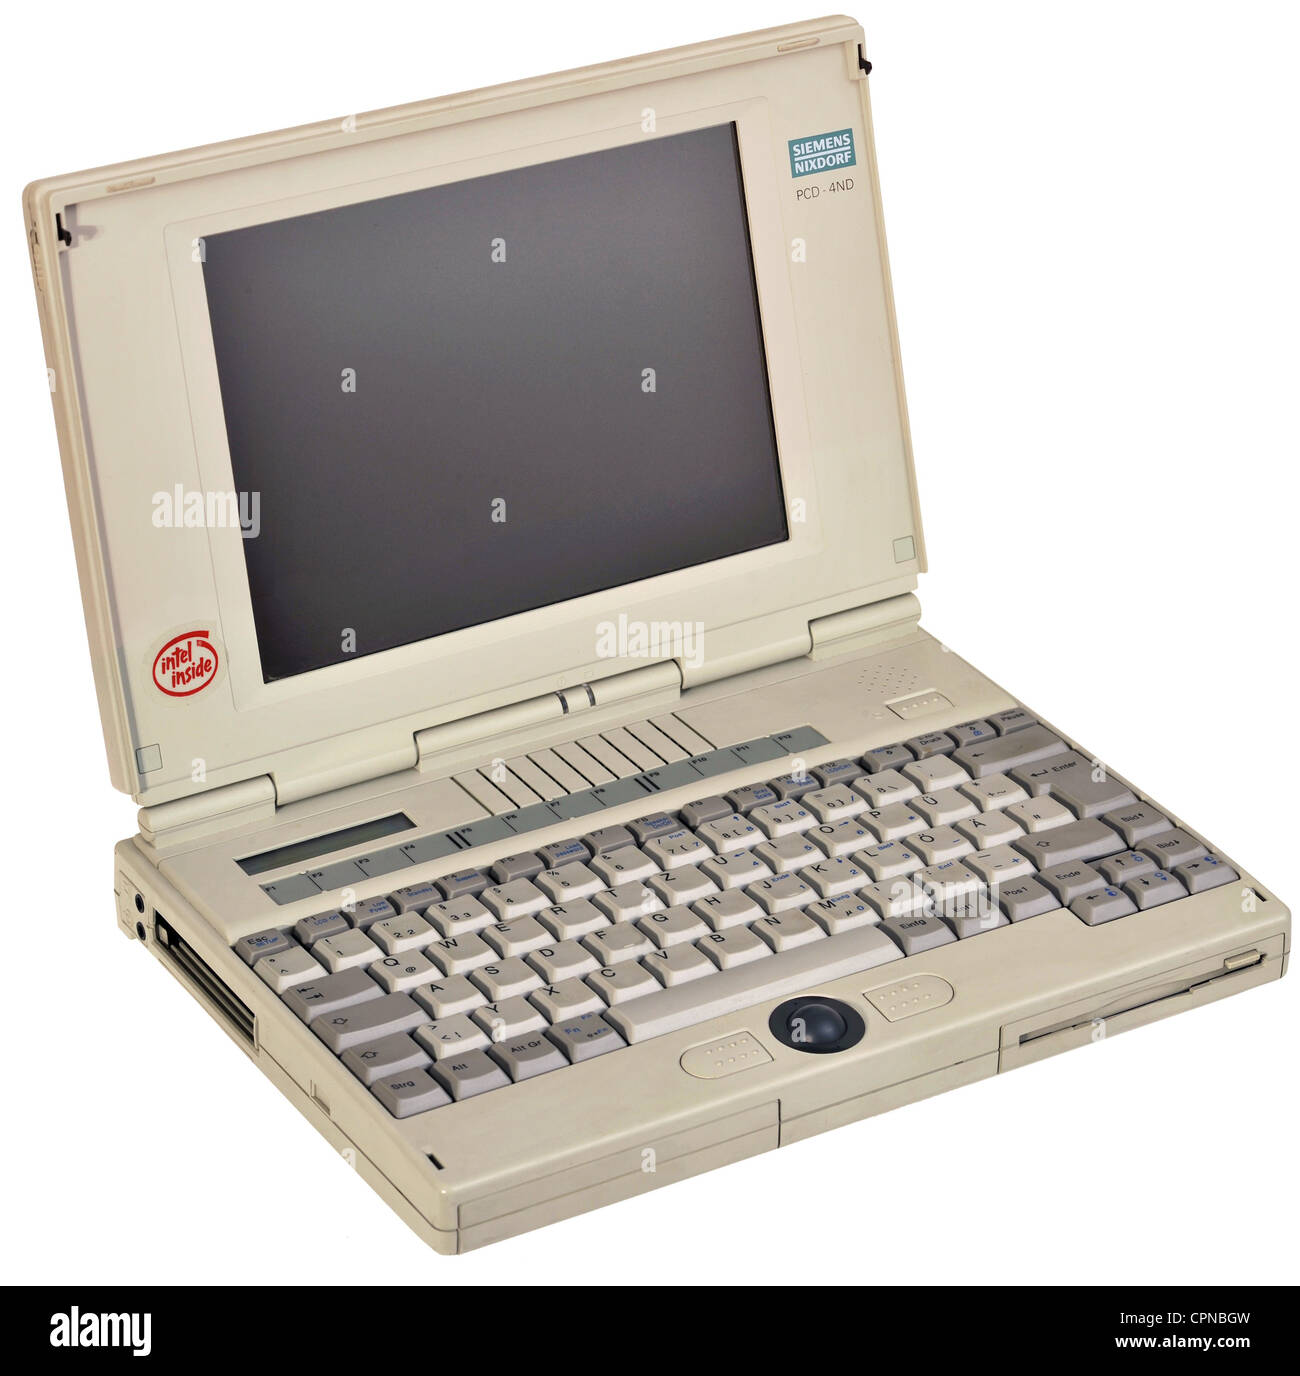 computing / electronics, notebook, laptop, Siemens Nixdorf, version PCD-4ND, processor Intel 80486 CPU, Intel inside, 75 megahertz, operating system Windows 98, working memory 20 MB, hard disk 500 MB, Germany, circa 1995, Additional-Rights-Clearences-Not Available Stock Photo